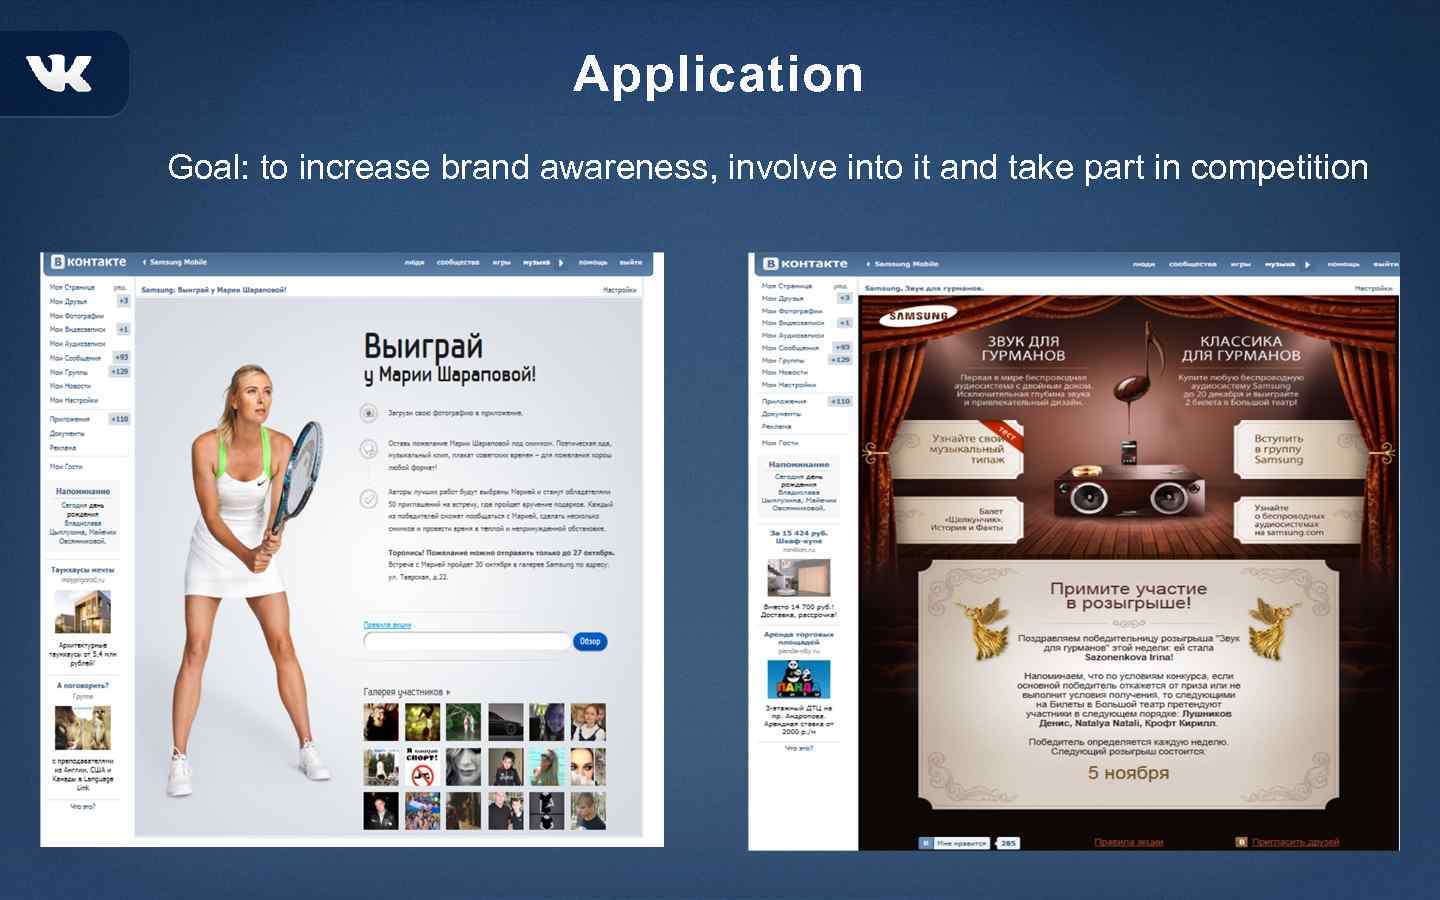 Application Goal: to increase brand awareness, involve into it and take part in competition